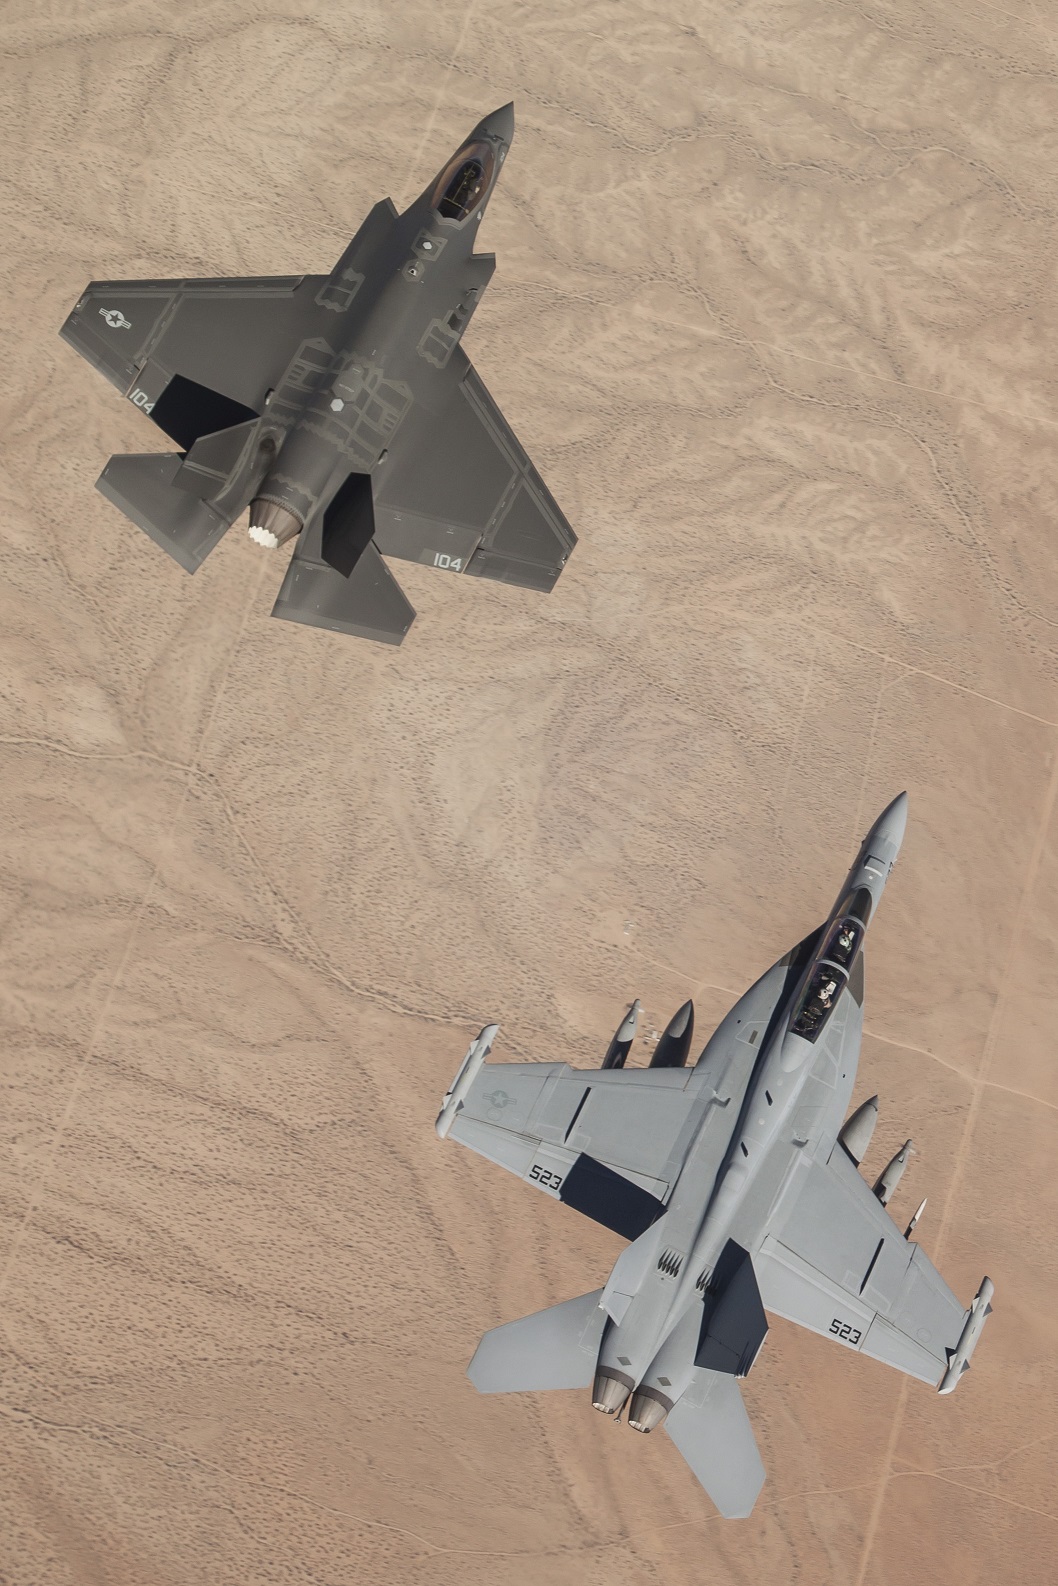 MOJAVE DESERT, Calif. (Aug. 28, 2014)  A U.S. Navy F/A-18F Super Hornet assigned to the Dust Devils of Air Test and Evaluation Squadron (VX) 31 at Naval Air Weapons Station China Lake, Calif., conducts an interoperability test event with a Navy F-35C Lightning II joint strike fighter aircraft over the Edwards Air Force Base test range with the Mojave Desert below. U.S. Navy photo courtesy of Lockheed Martin by Matt Short.